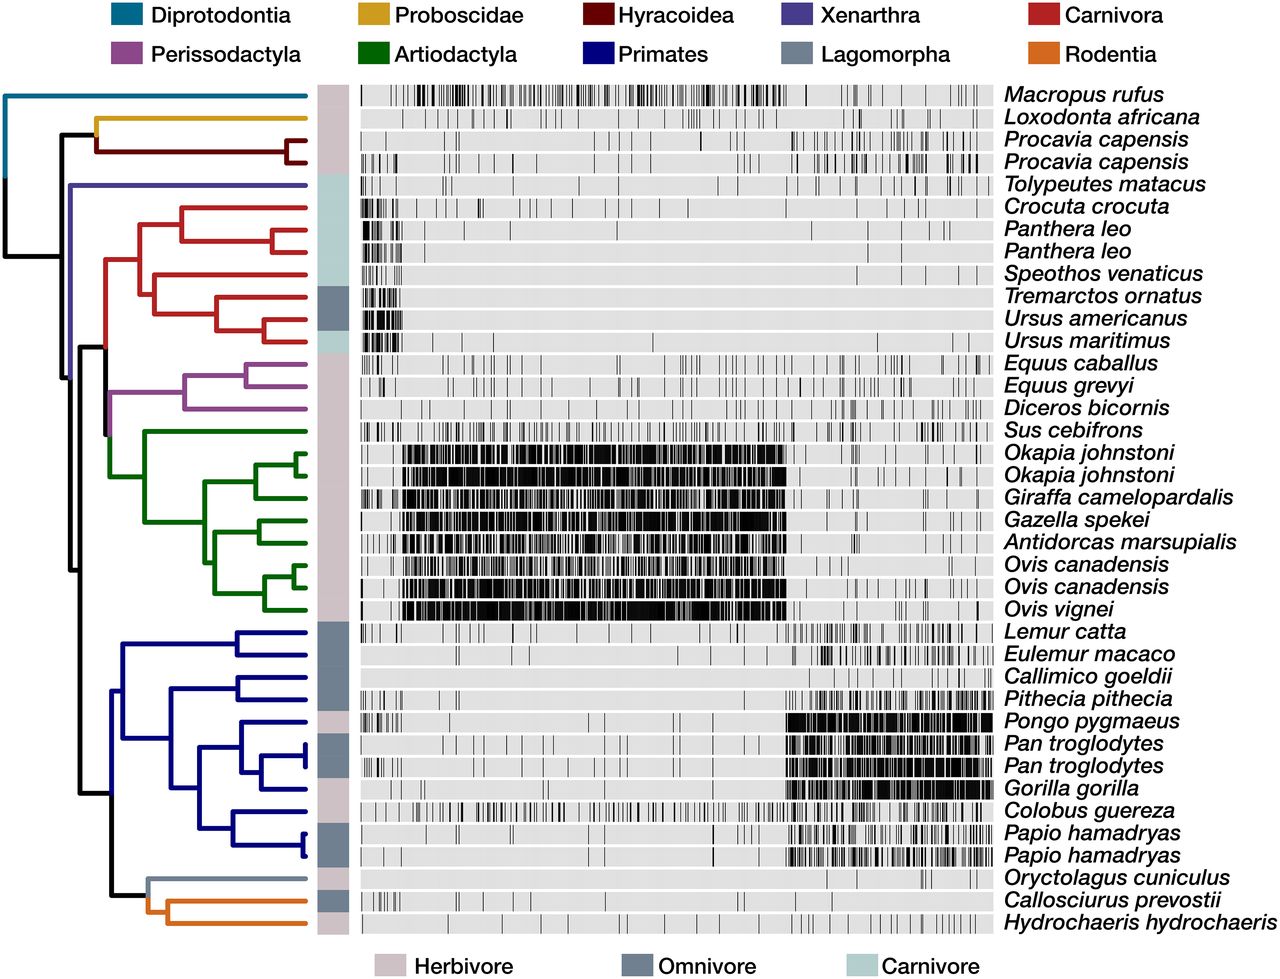 The phylogenetic distribution of specific groups of microbes reveals associations between gut microbiota and mammalian evolutionary history. 